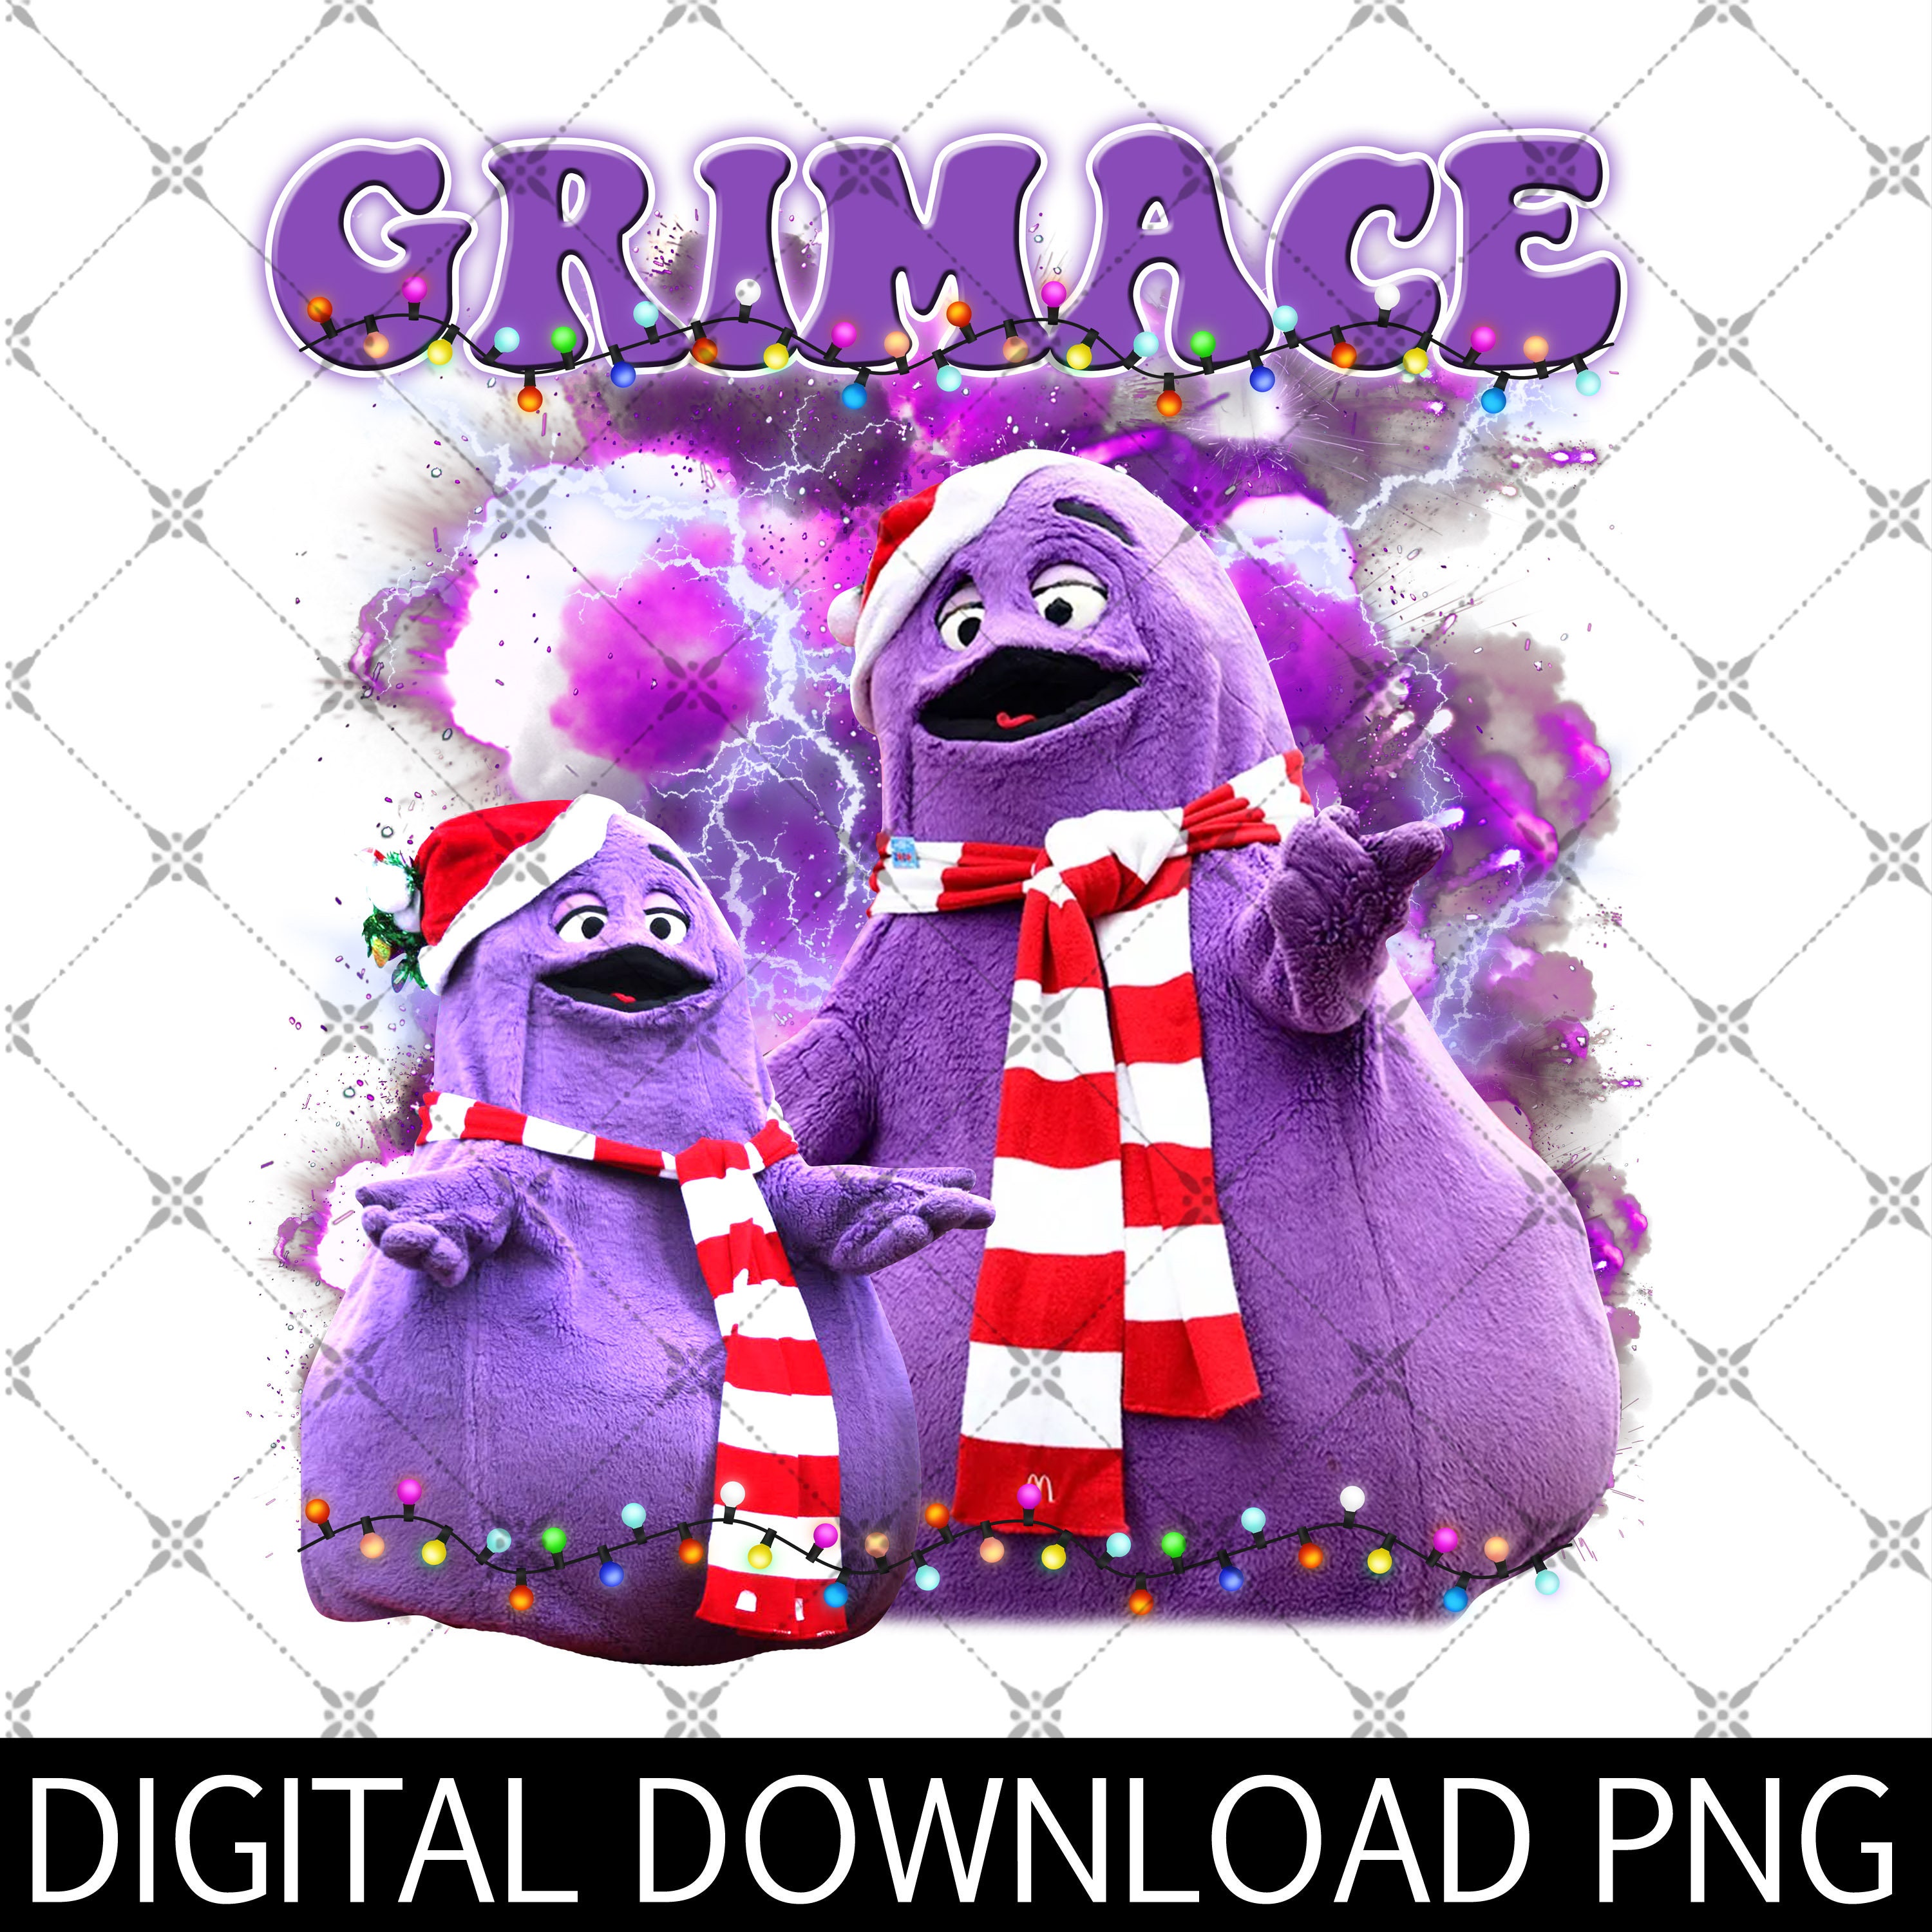 Grimace Shake Semi-Glossy Paper Poster A3